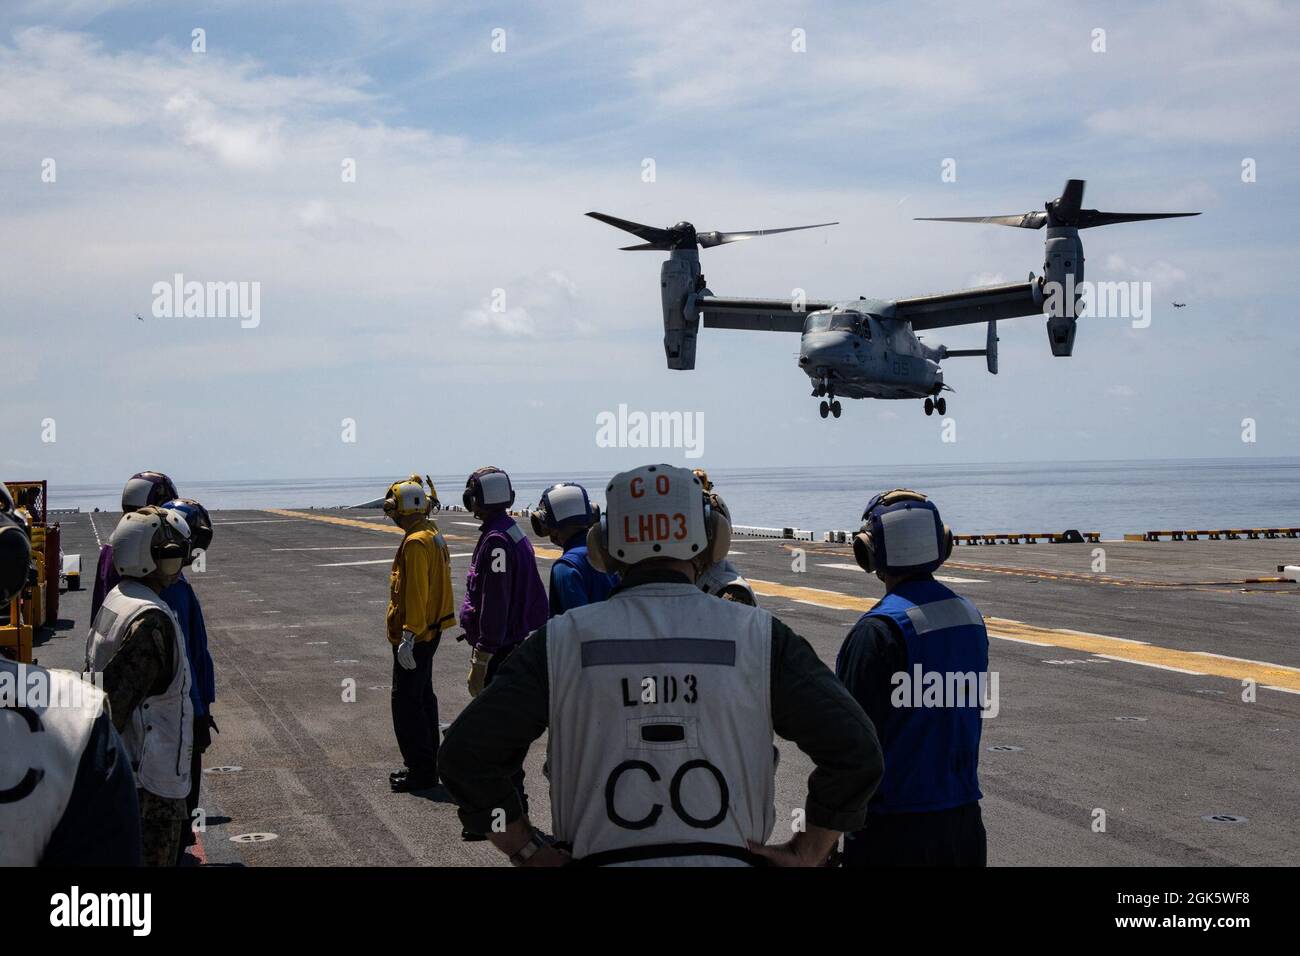 A U.S. Marine Corps Osprey transporting the U.S. Secretary of the Navy Carlos Del Toro, U.S. Representative Rob Wittman (R-VA), and U.S. Navy Adm. Michael Gilday, Chief of Naval Operations, lands on the USS Kearsarge during Large Scale Exercise (LSE) 2021, off the coast of North Carolina, Aug. 10, 2021. II Marine Expeditionary Force is a maritime force inextricably linked to our Navy partners in U.S. 6th and 2nd Fleets, creating mutual interdependence with our Fleet counterparts leverages our collective capabilities and increases maritime lethality. LSE 2021 merges live and synthetic training Stock Photo